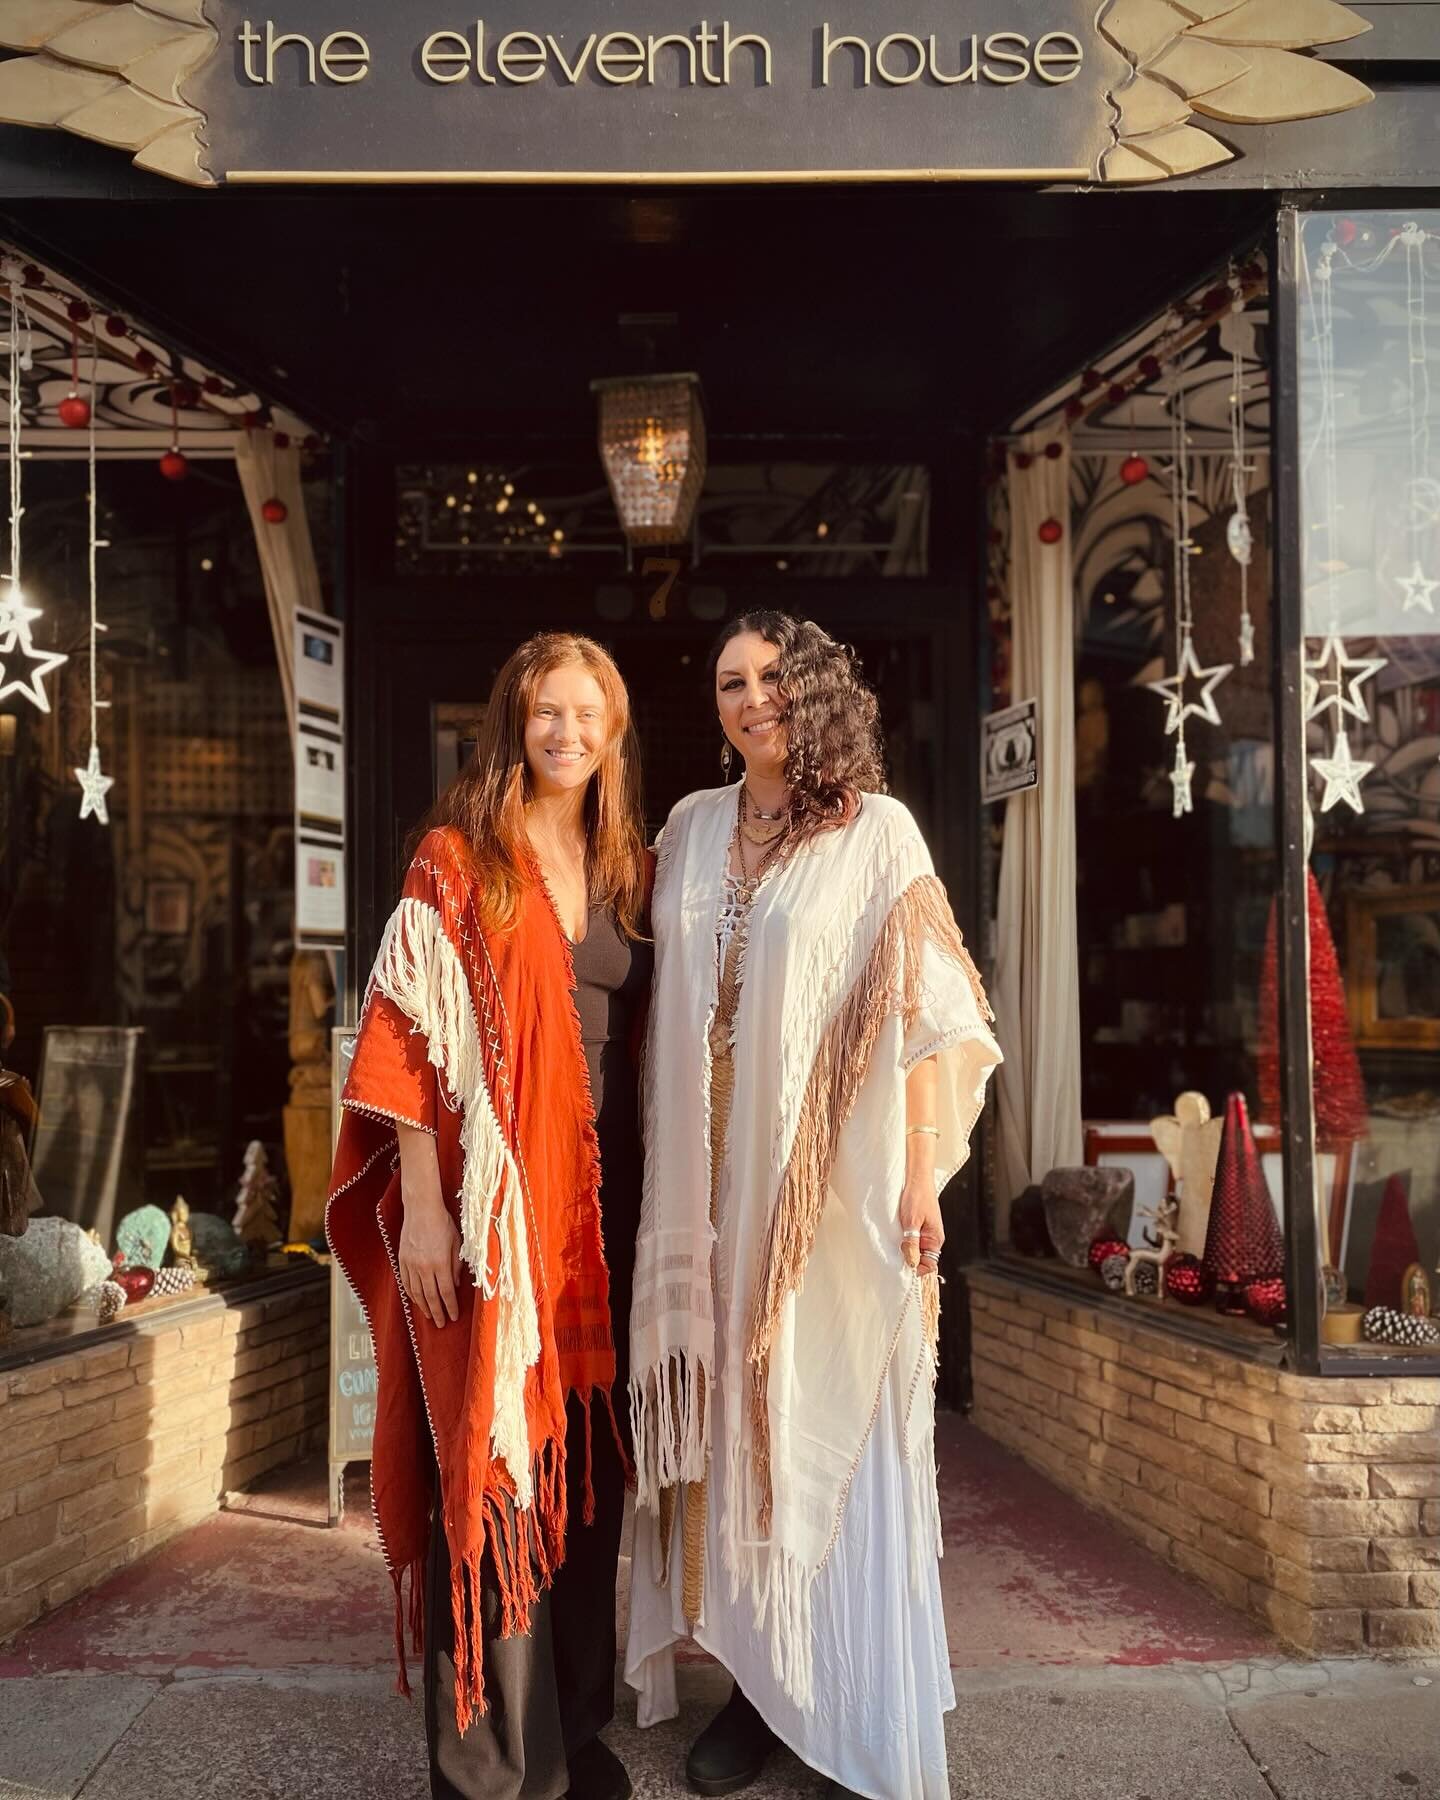 Two Priestesses of This Temple Space✨
.
Melusina Gomez is a Curandera and Practitioner of Nahualismo, having studied indigenous ancestral healing arts for over 20 years. She offers 1:1 sessions at the eleventh house including Limpias, Sobadas, Tarot 